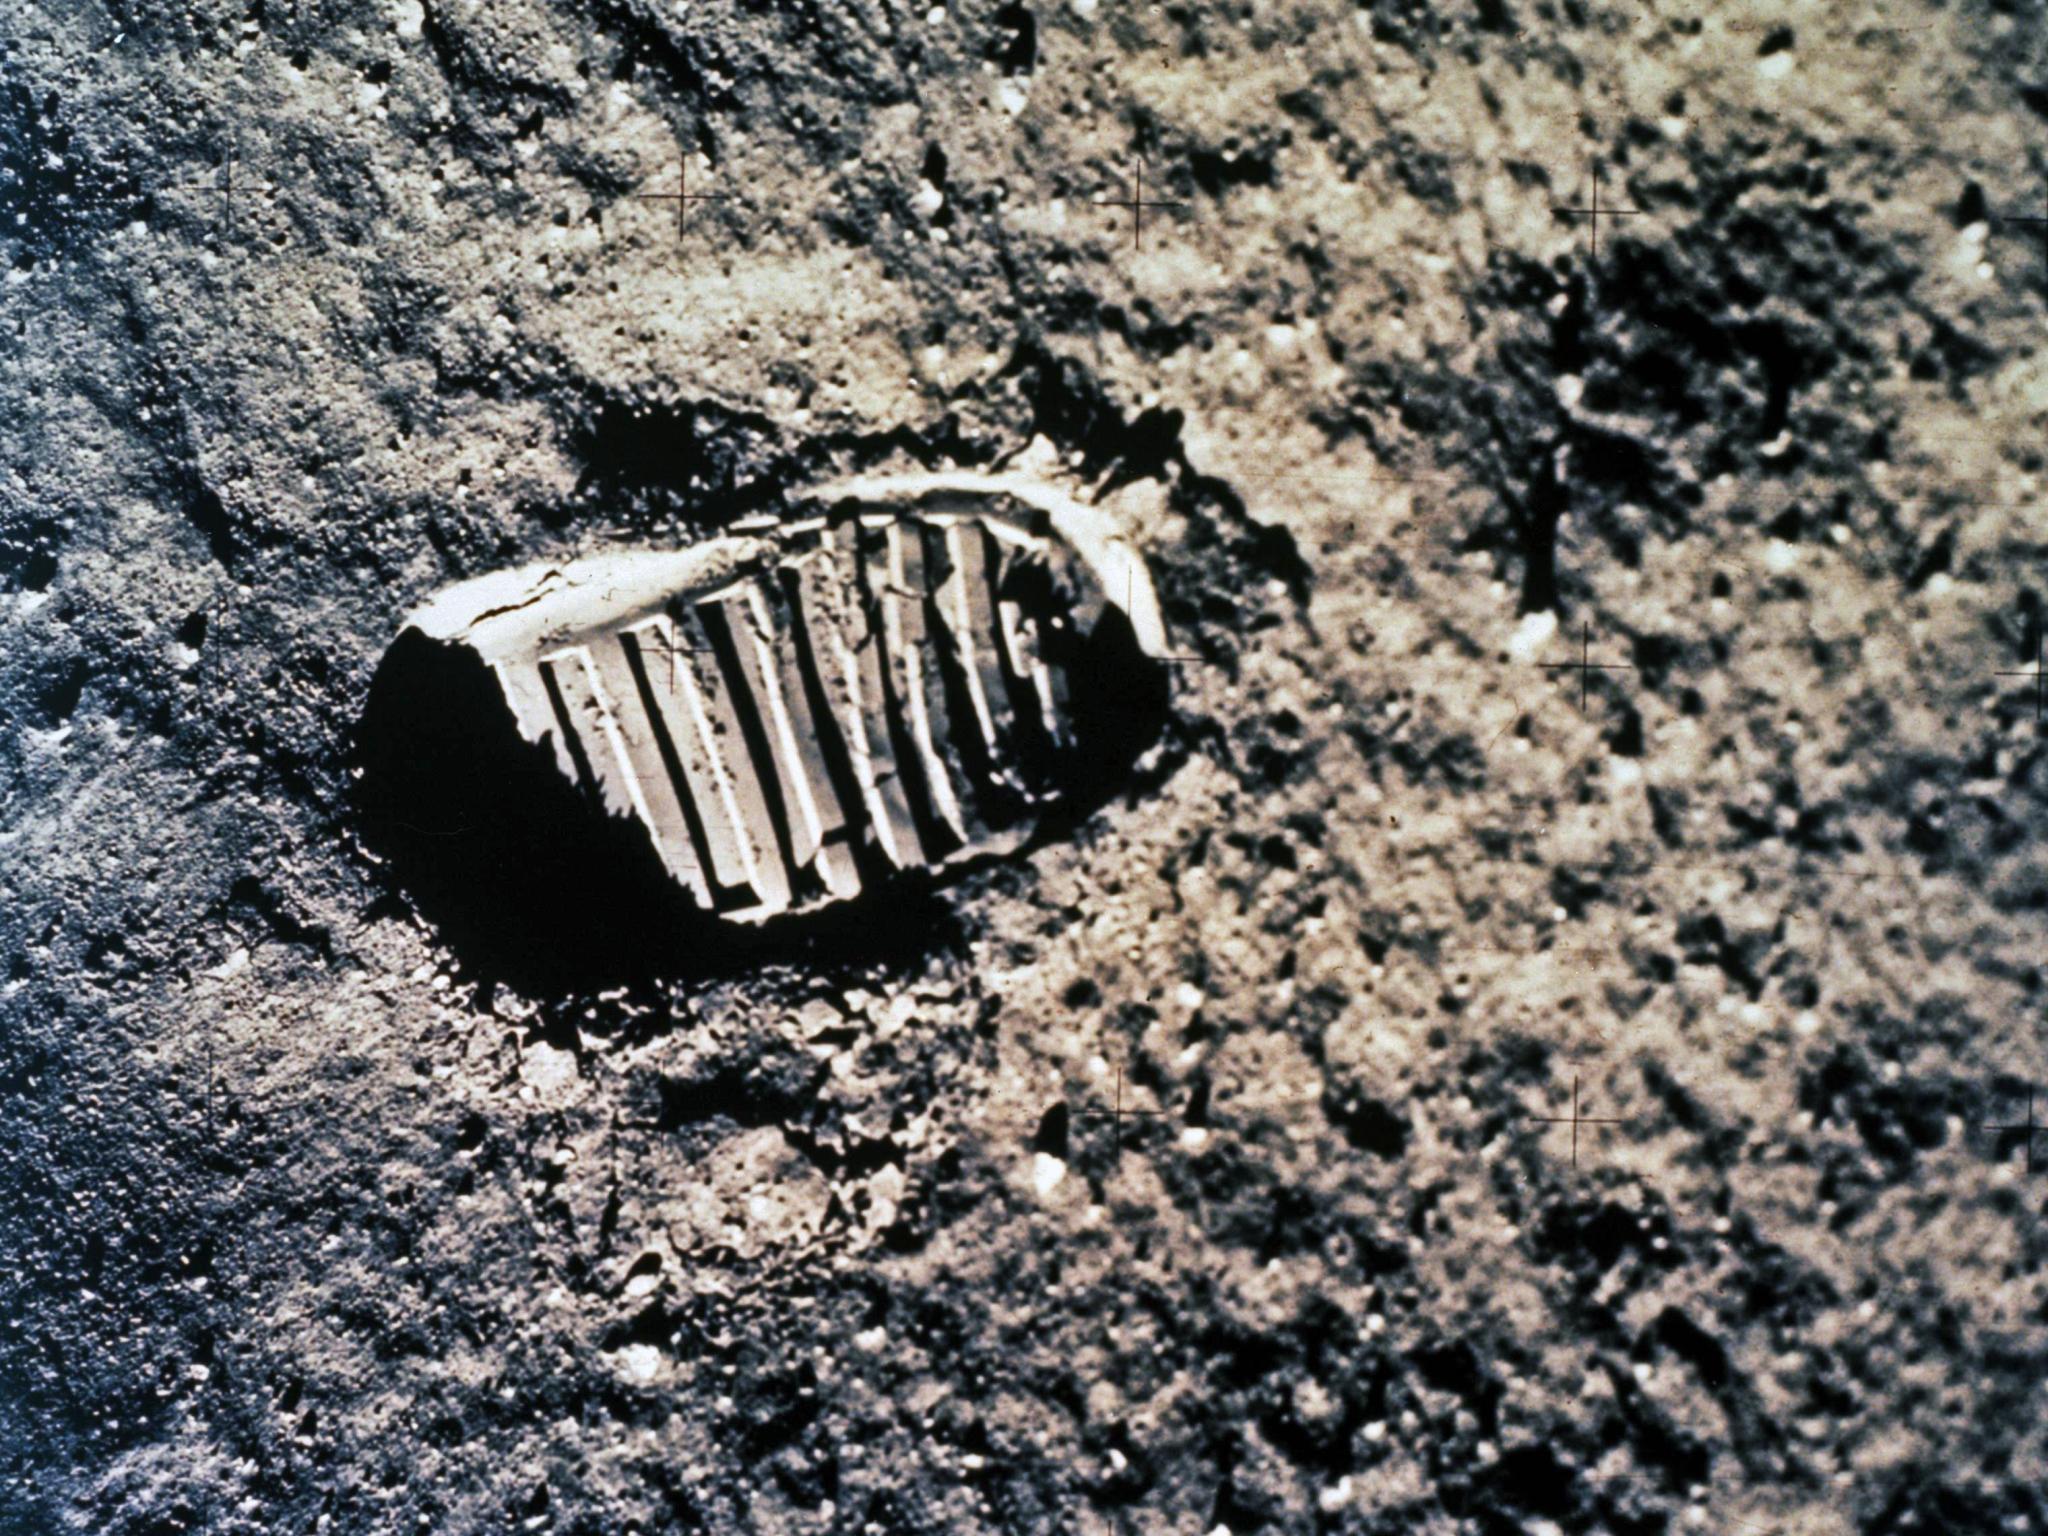 Bootprint on the moon from the Apollo 11 mission